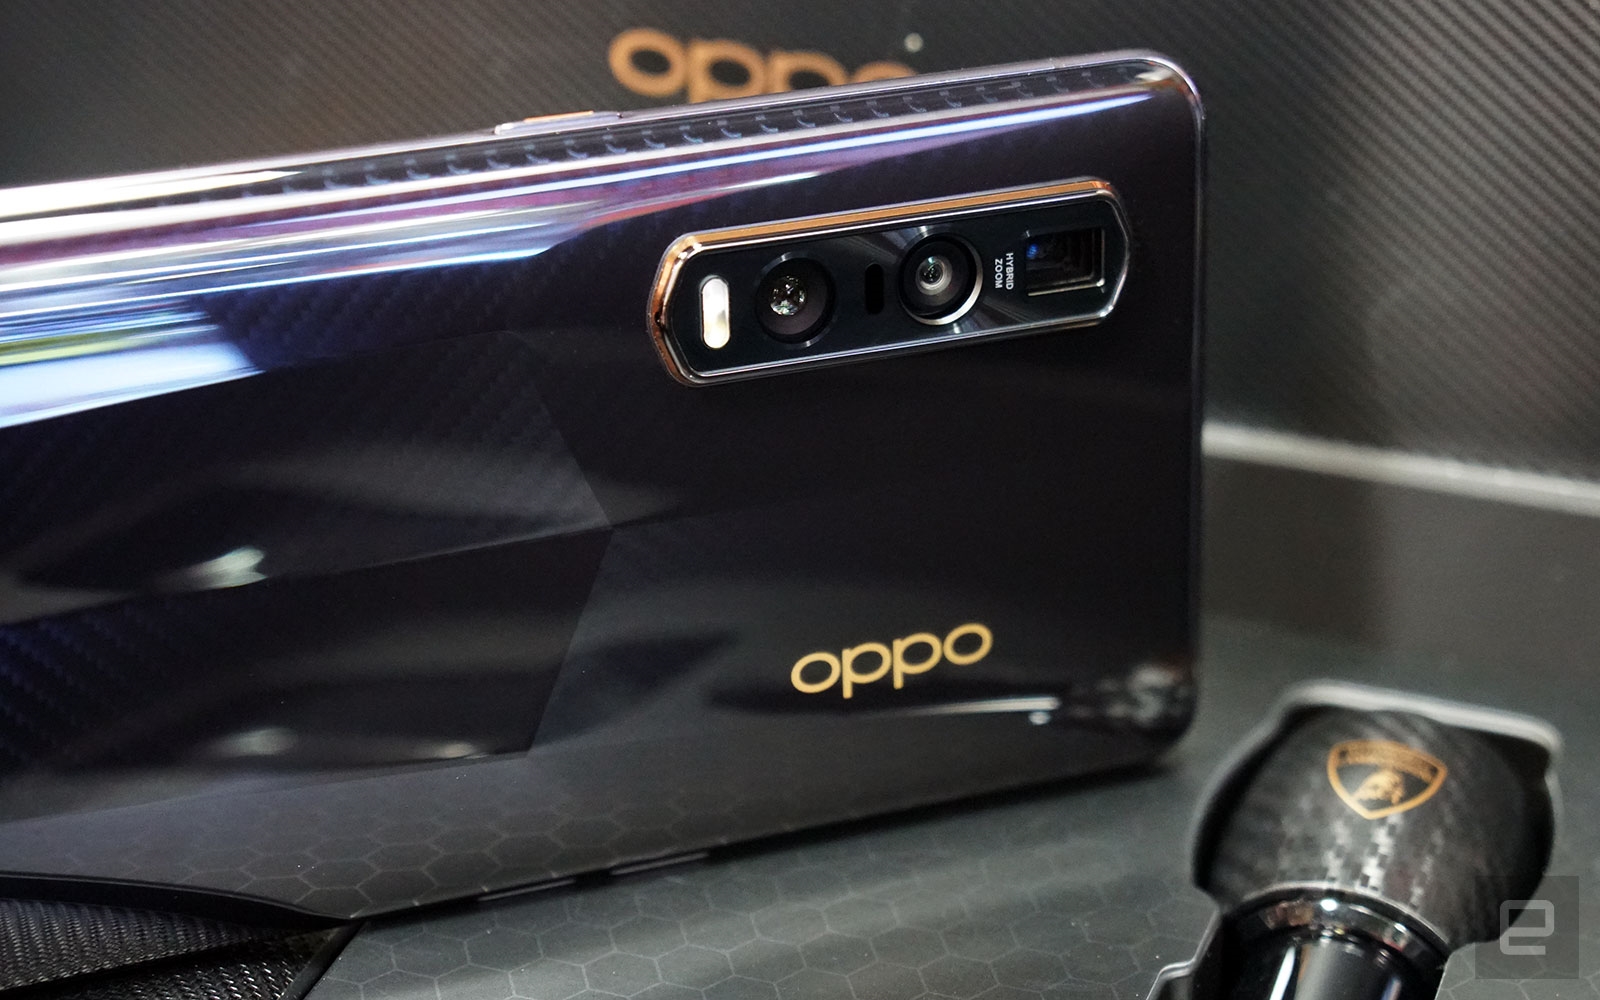 Oppo's Find X3 phones will support true 10-bit color from camera to display | DeviceDaily.com